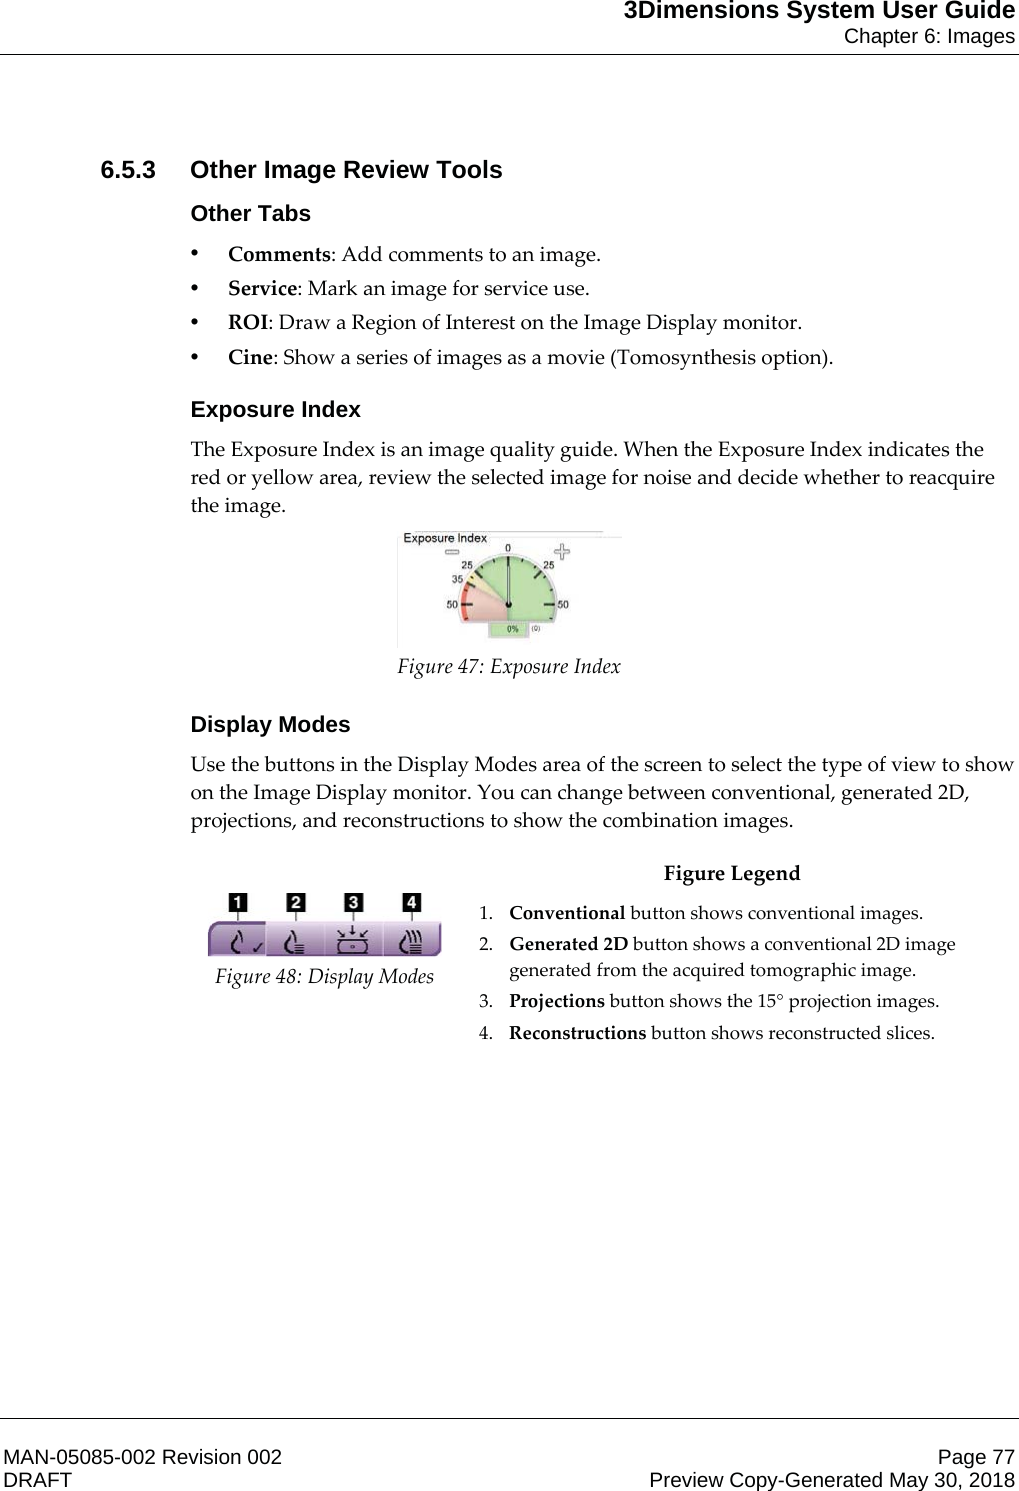 3Dimensions System User GuideChapter 6: ImagesMAN-05085-002 Revision 002 Page 77DRAFT Preview Copy-Generated May 30, 20186.5.3 Other Image Review ToolsOther Tabs•Comments: Add comments to an image. •Service: Mark an image for service use. •ROI: Draw a Region of Interest on the Image Display monitor. •Cine: Show a series of images as a movie (Tomosynthesis option). Exposure IndexThe Exposure Index is an image quality guide. When the Exposure Index indicates the red or yellow area, review the selected image for noise and decide whether to reacquire the image. Figure 47: Exposure Index Display ModesUse the buttons in the Display Modes area of the screen to select the type of view to show on the Image Display monitor. You can change between conventional, generated 2D, projections, and reconstructions to show the combination images.   Figure 48: Display Modes Figure Legend 1. Conventional button shows conventional images. 2. Generated 2D button shows a conventional 2D image generated from the acquired tomographic image. 3. Projections button shows the 15° projection images. 4. Reconstructions button shows reconstructed slices.  